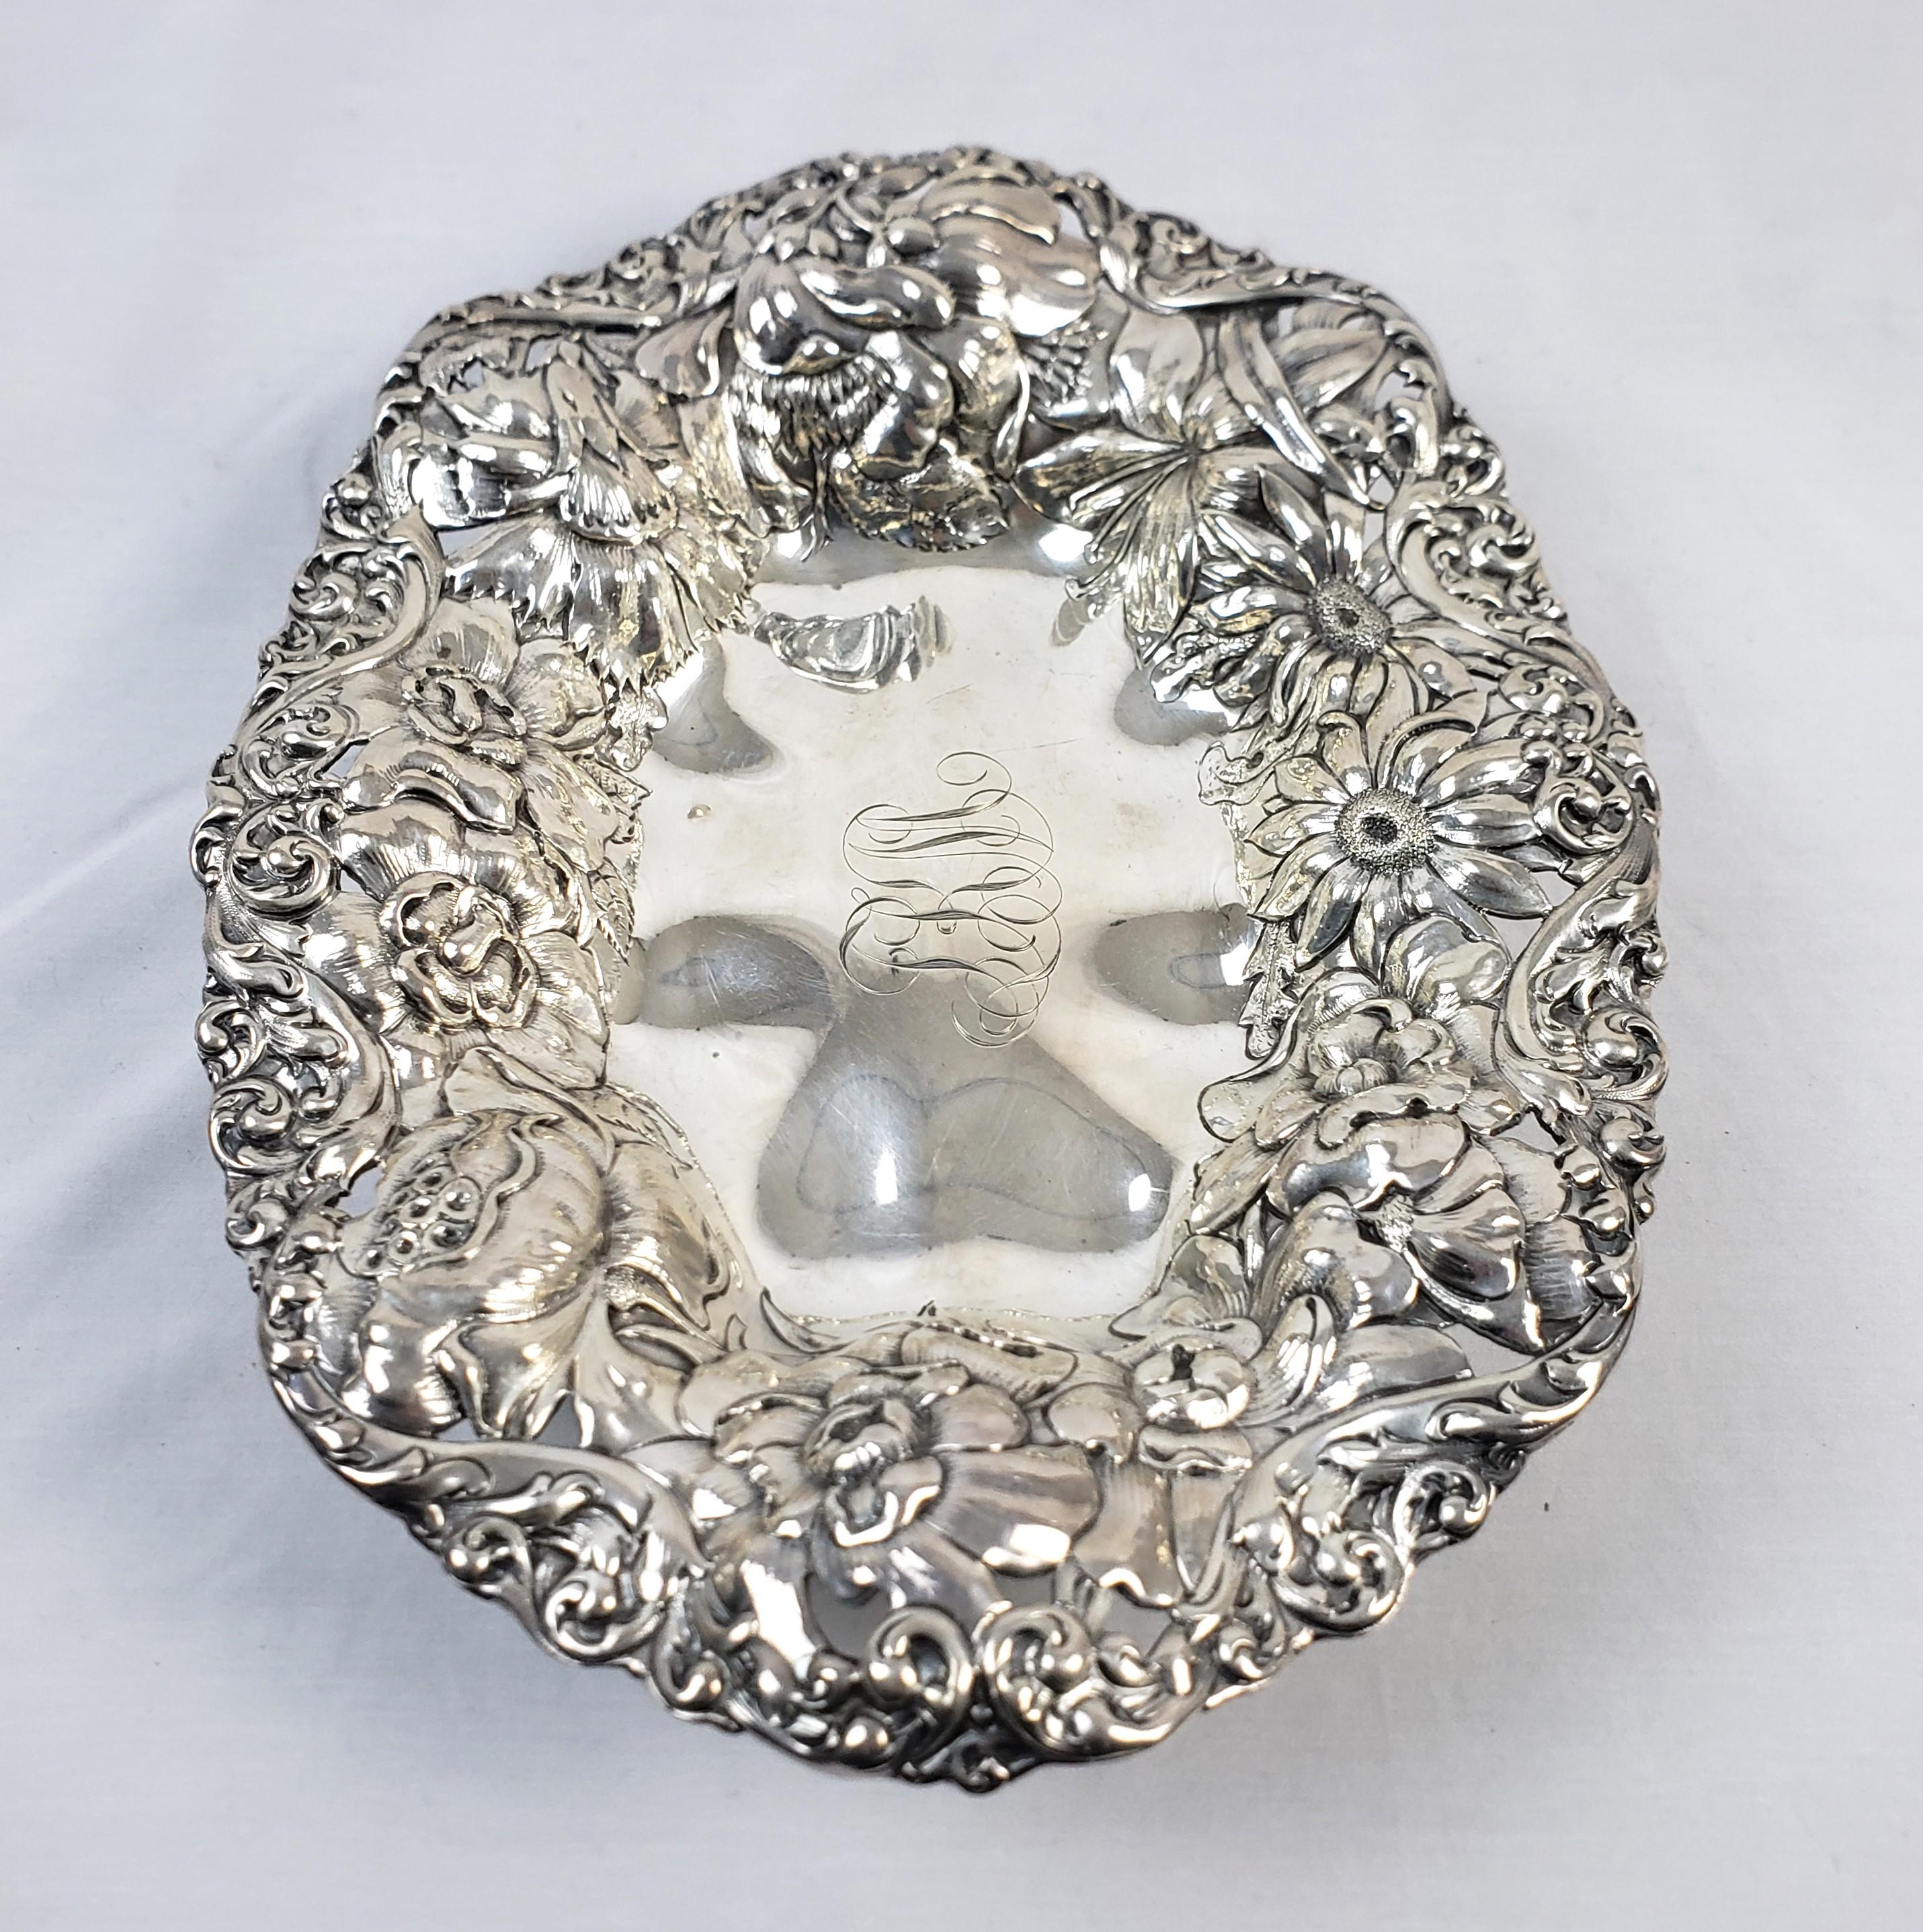 20th Century Antique Gorham Sterling Silver Bowl with Ornate Chased Floral Decoration For Sale